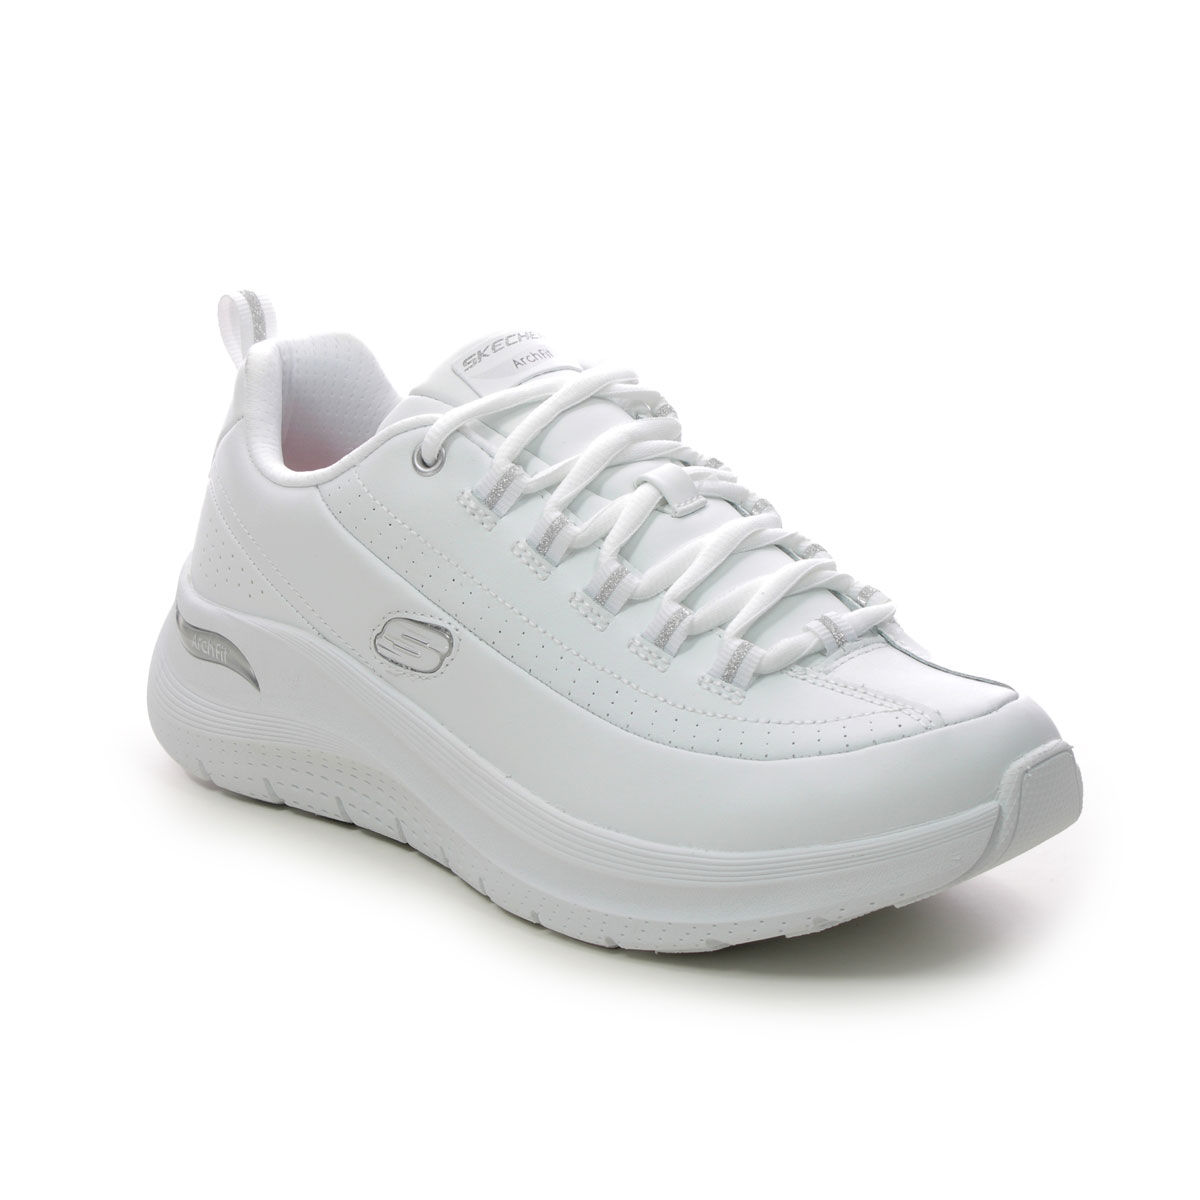 Skechers Synergy Arch 2 WSL White Silver Womens trainers 150061 in a Plain Leather in Size 8